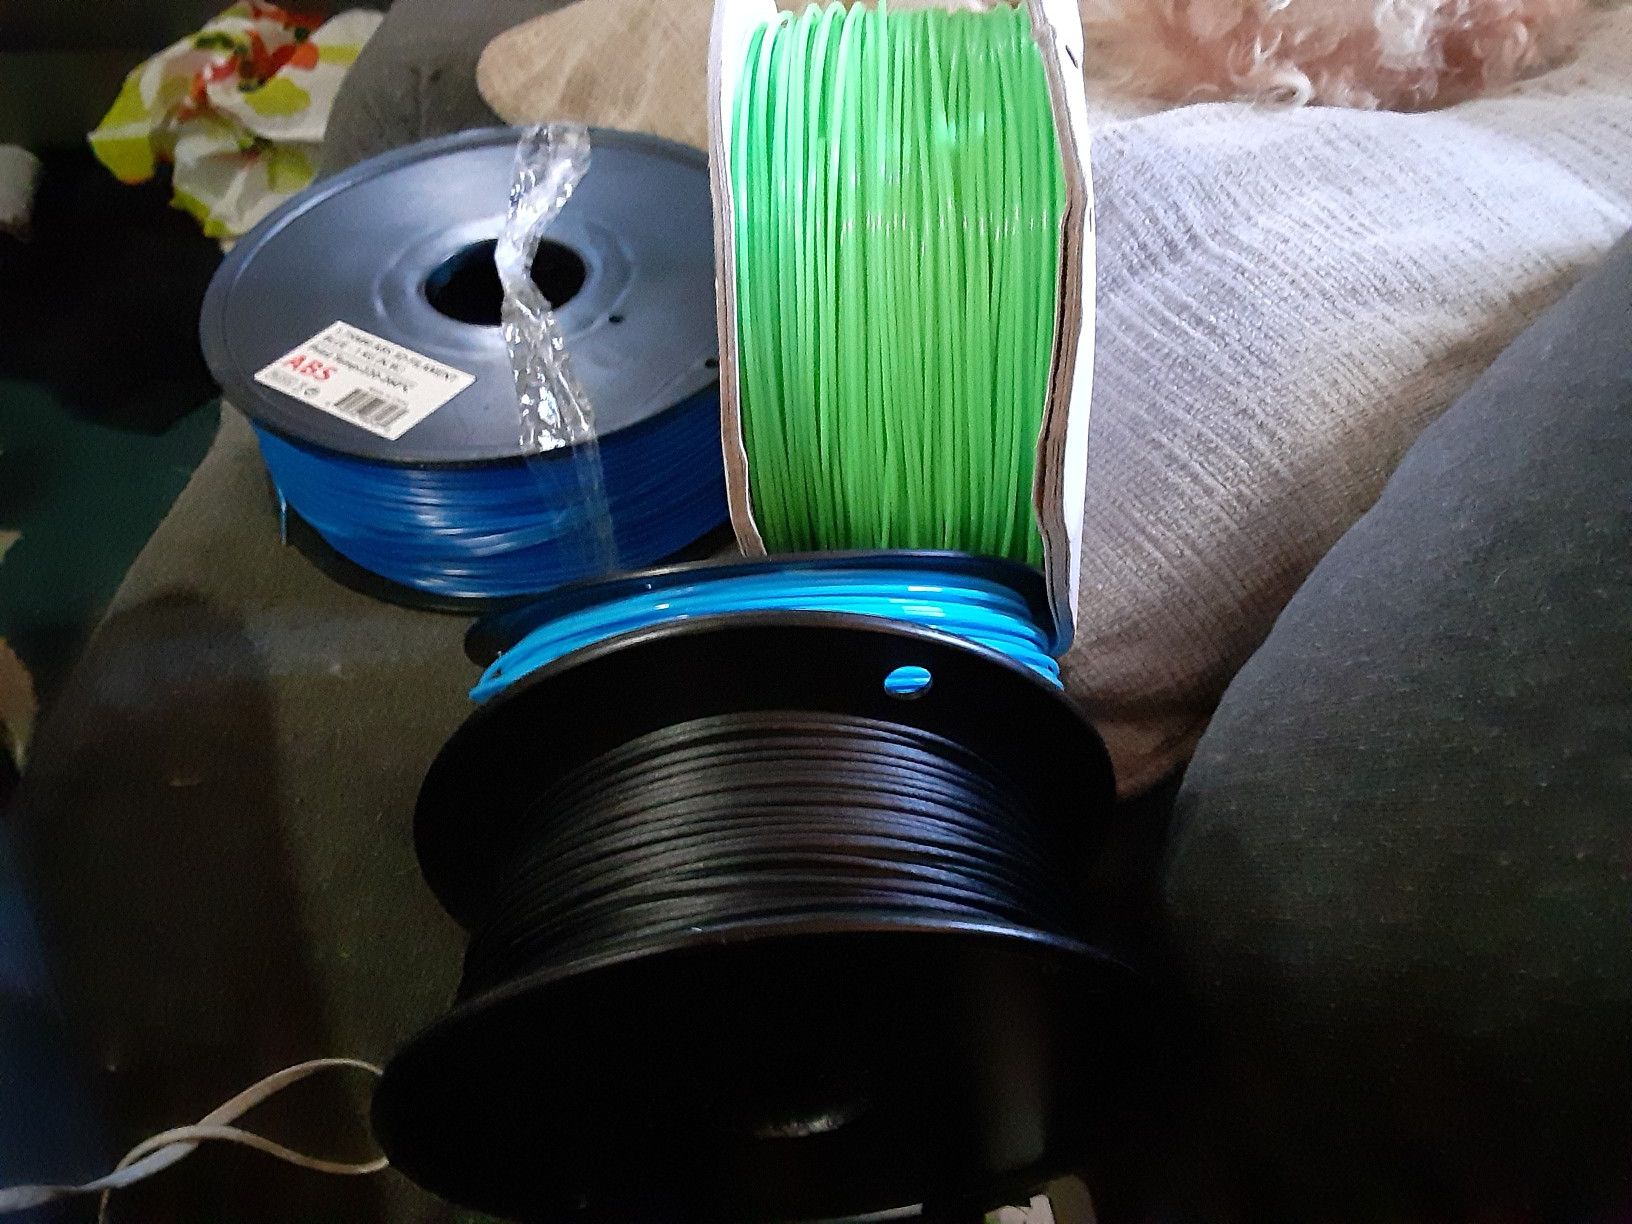 3D filament,I have 5 rolls 2 robot a small amount used,ABS, I brand new roll glow in the dark blue ,MG chemical glow in the dark brand new rolls